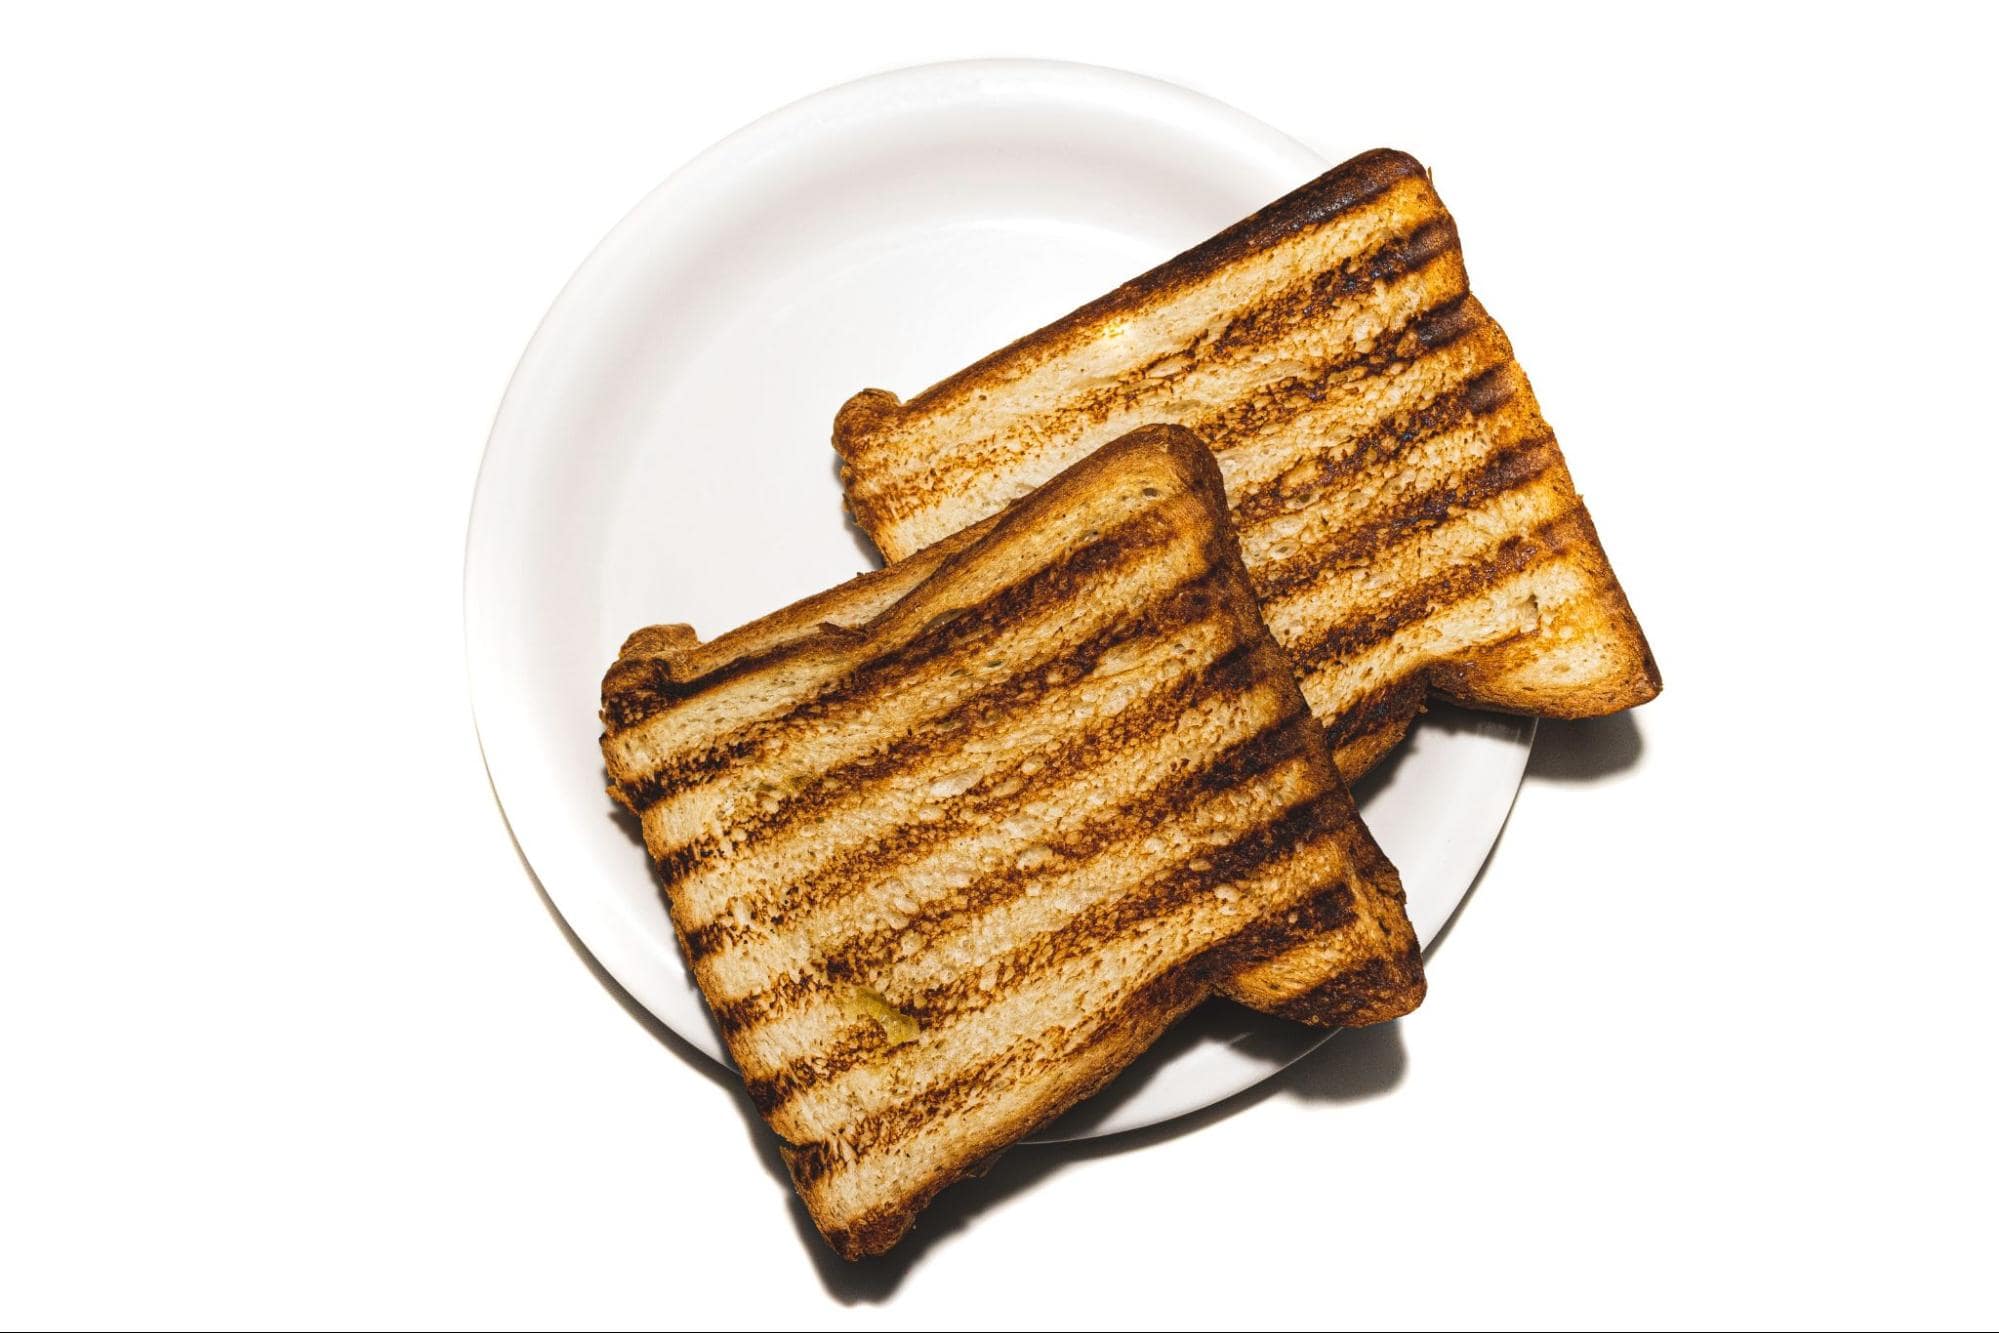 Image of two pieces of toast